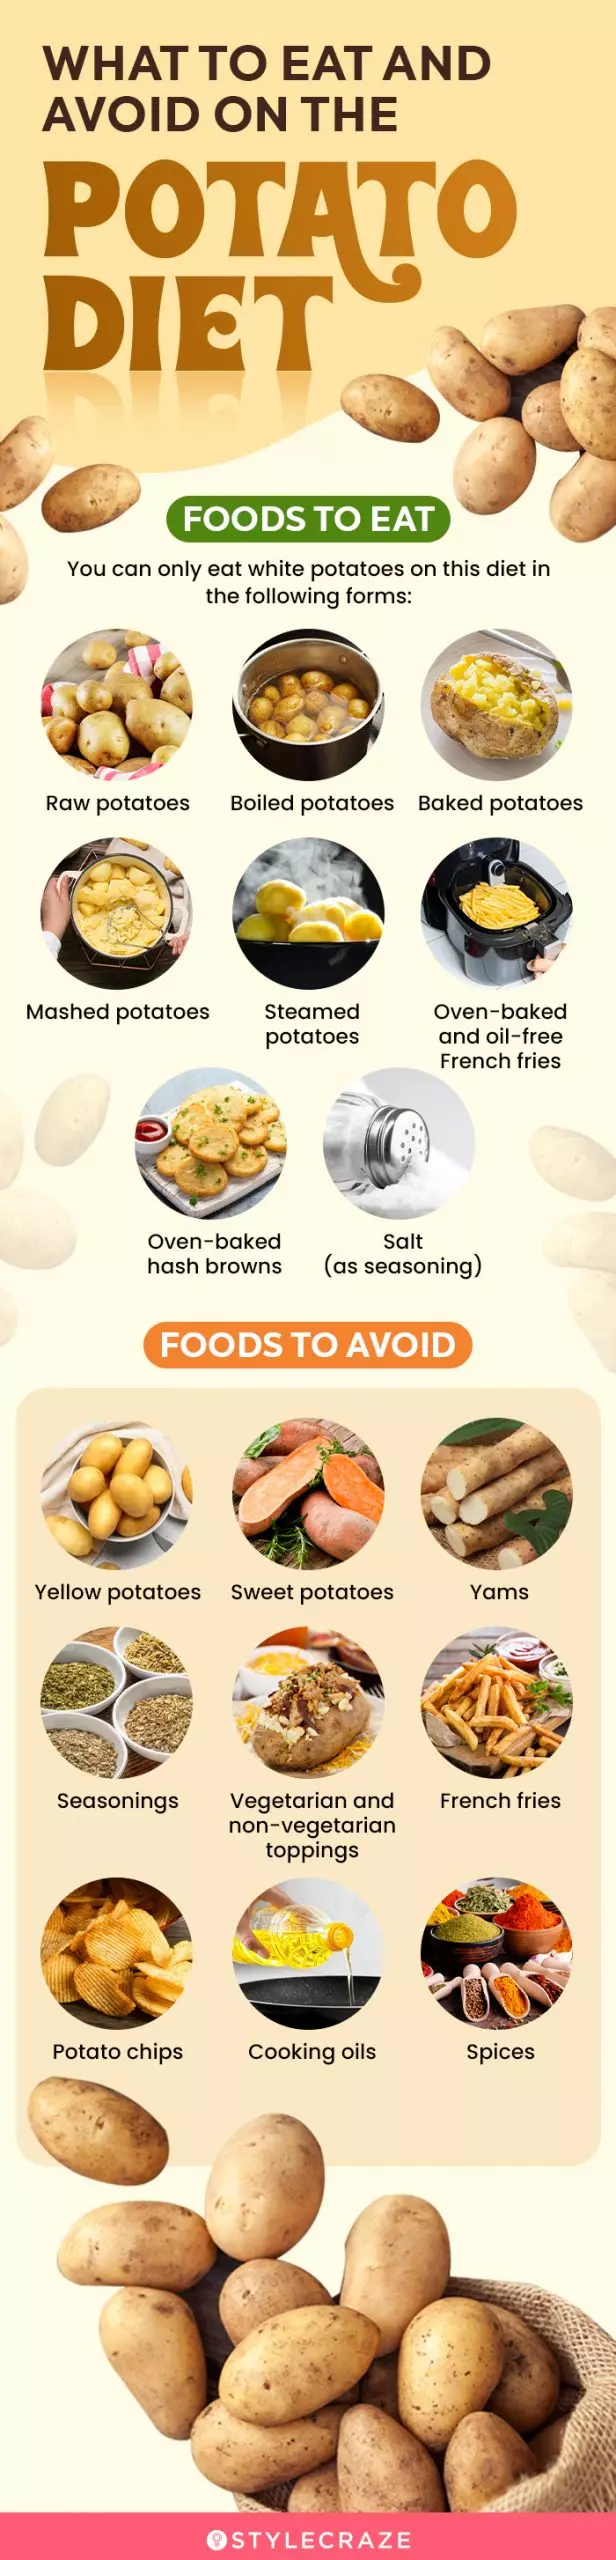 what to eat and avoid on the potato diet (infographic)